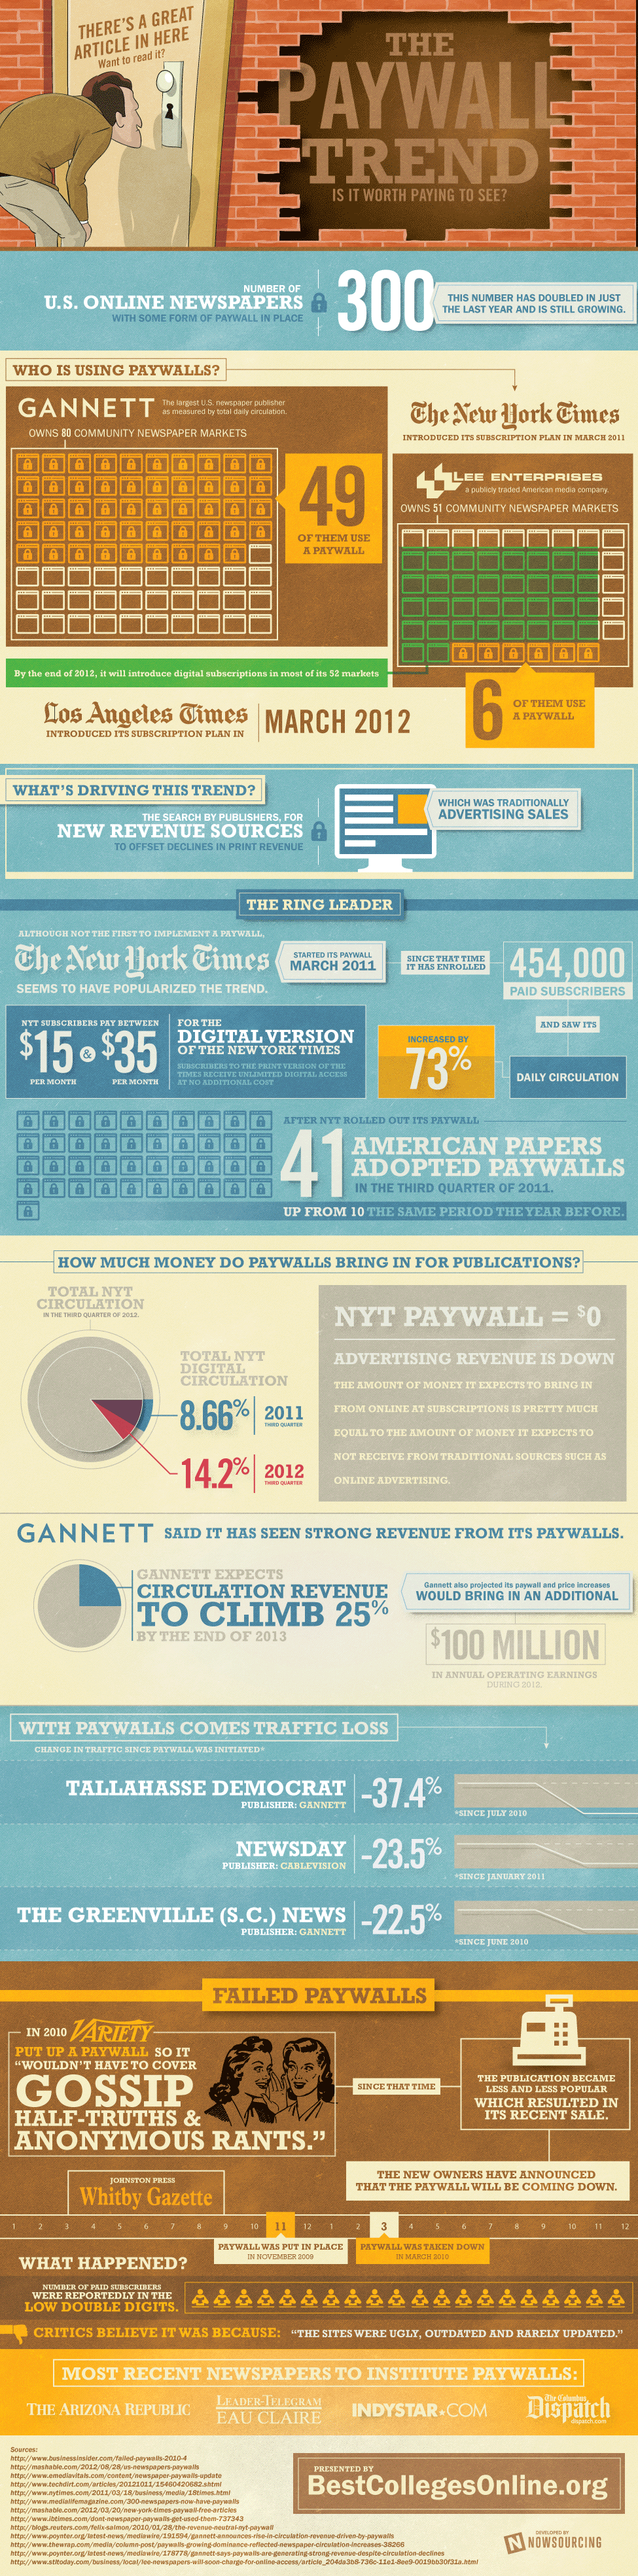 Infographic: Paywall Trends